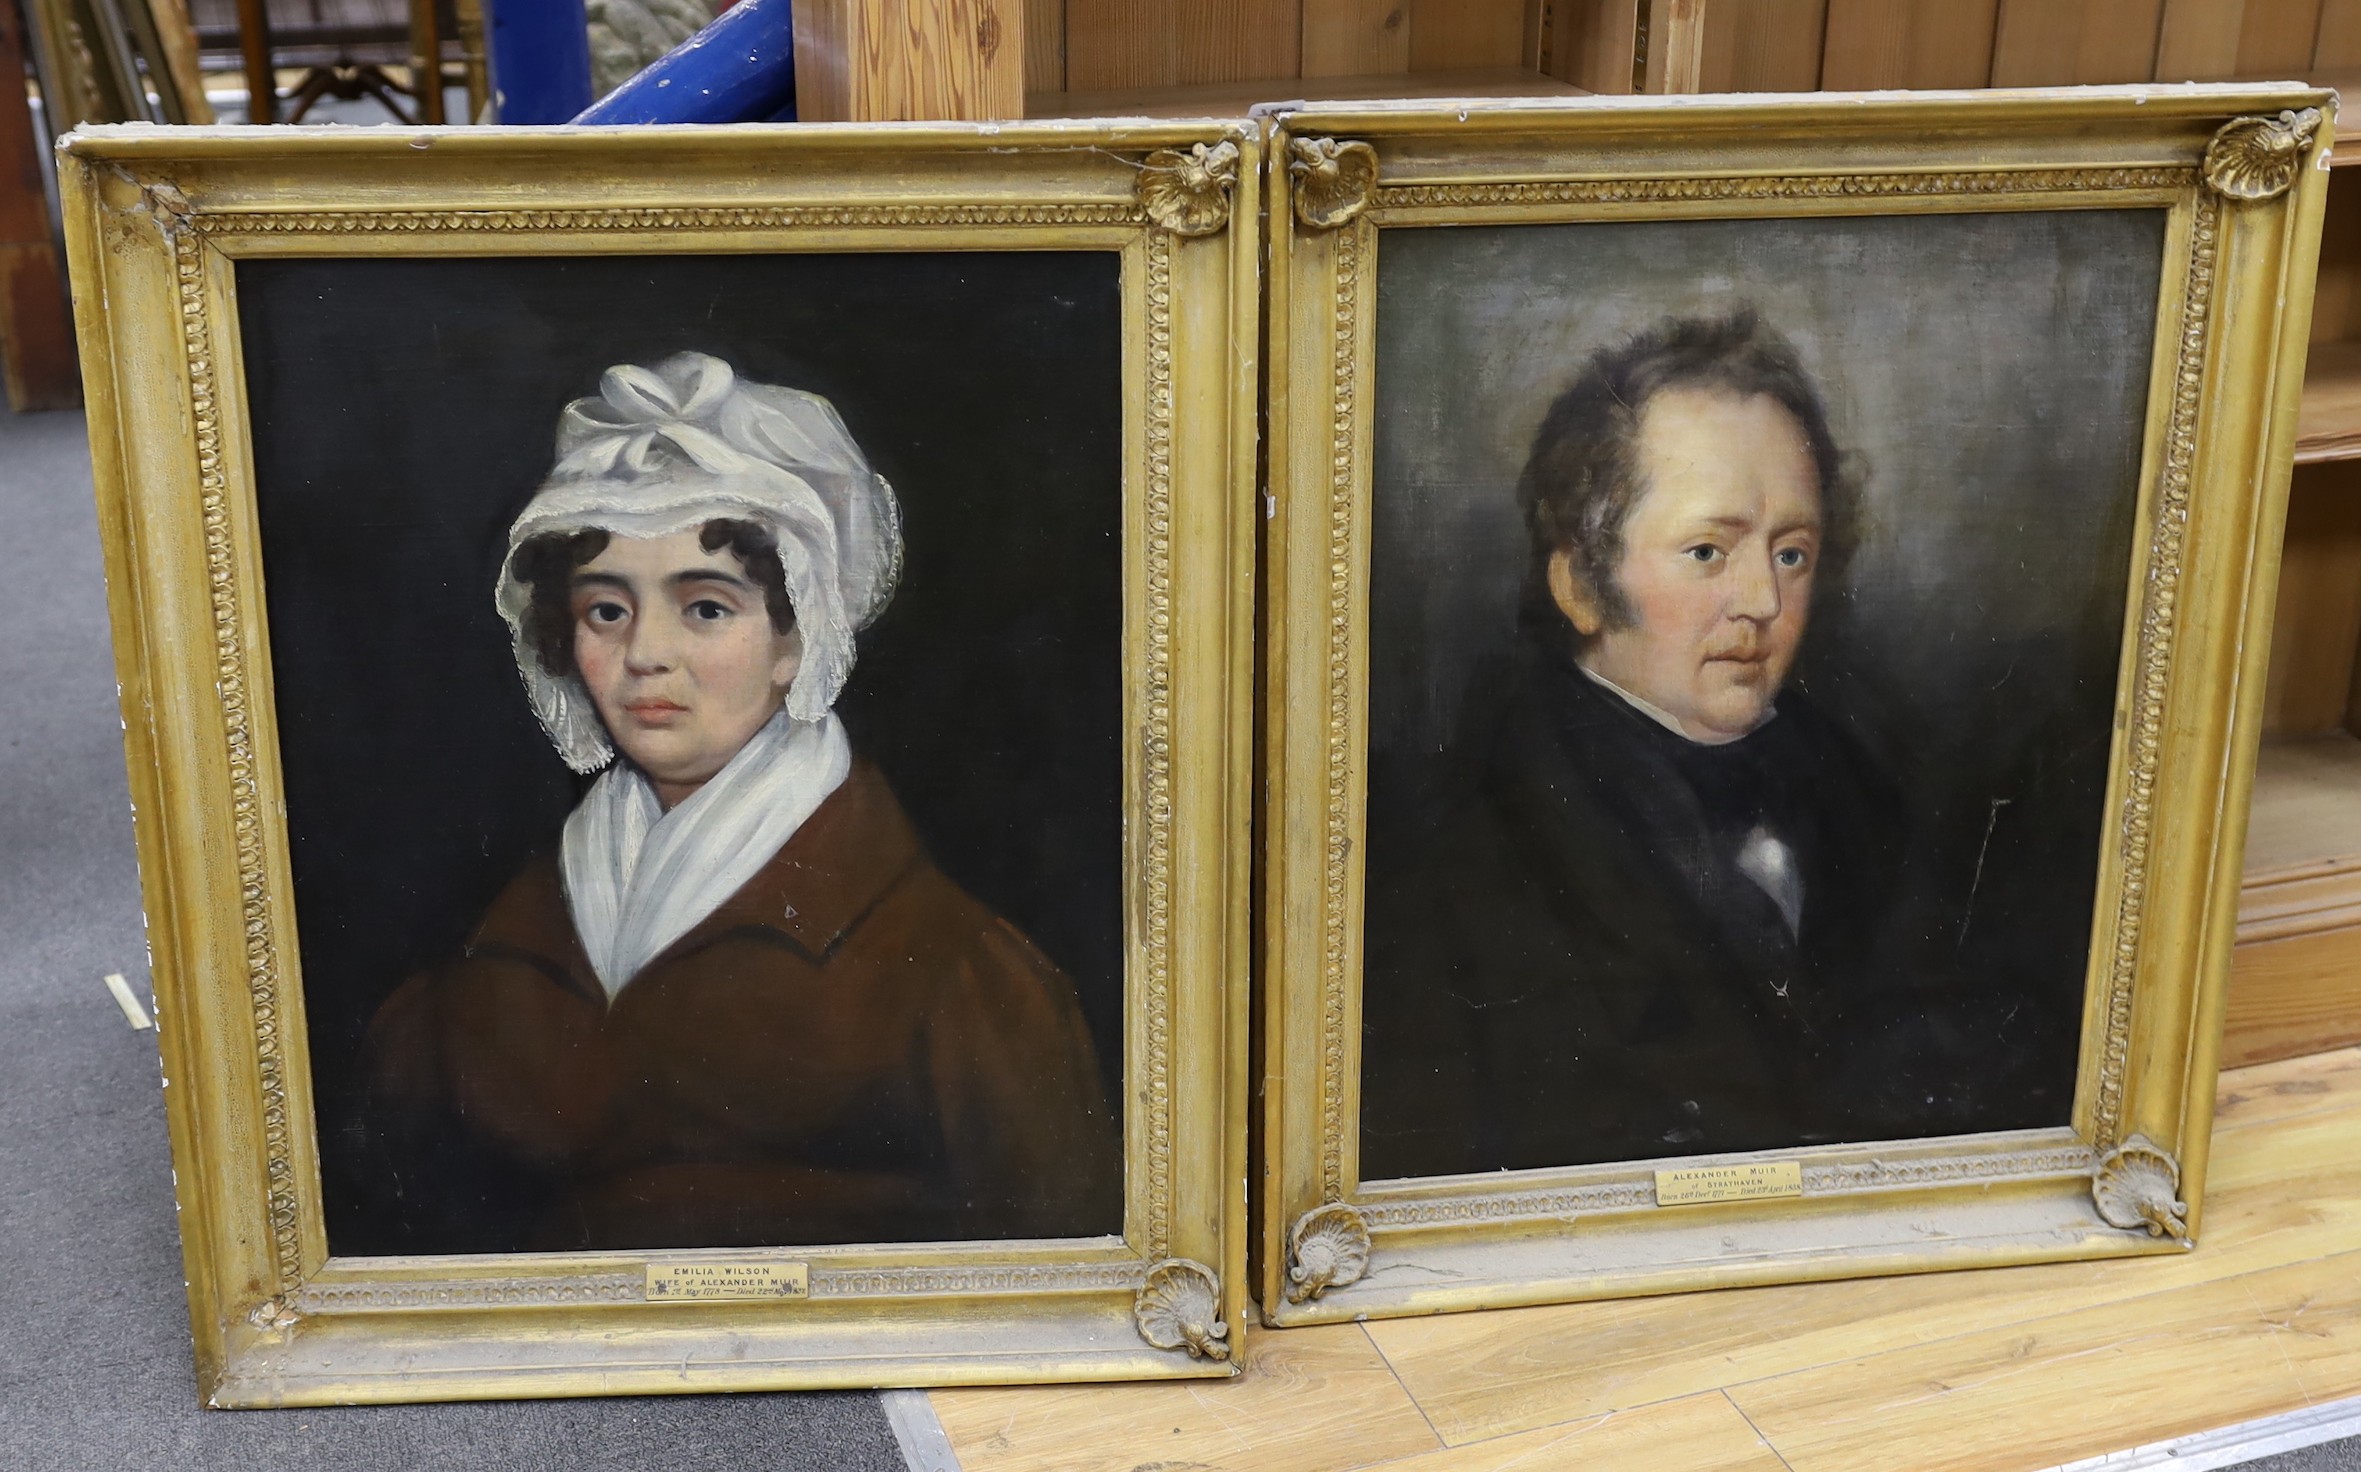 British or American School, early 19th century, pair of oils on canvas, Portrait of Emilia Wilson (1778-1837), wide of Alexander Muir, unsigned, together with a Portrait of Alexander Muir of Strathaven (1771-1858), unsig